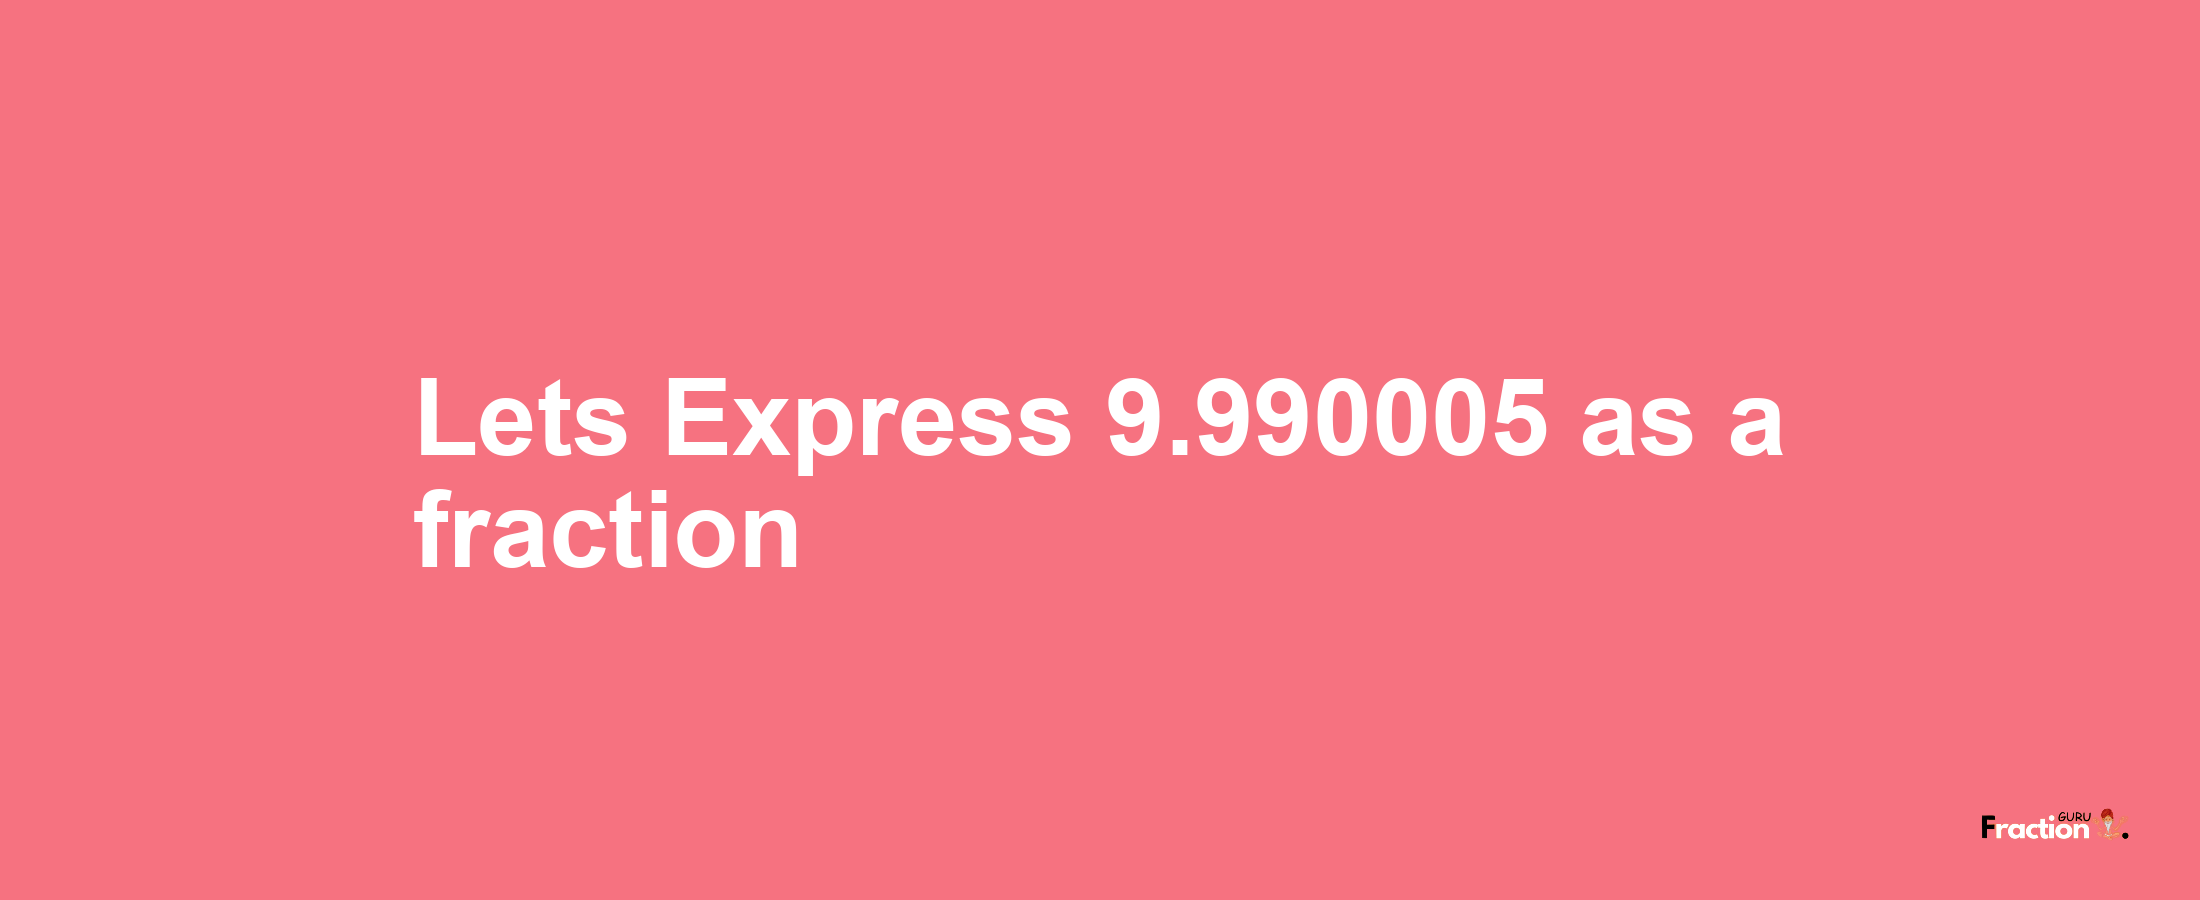 Lets Express 9.990005 as afraction